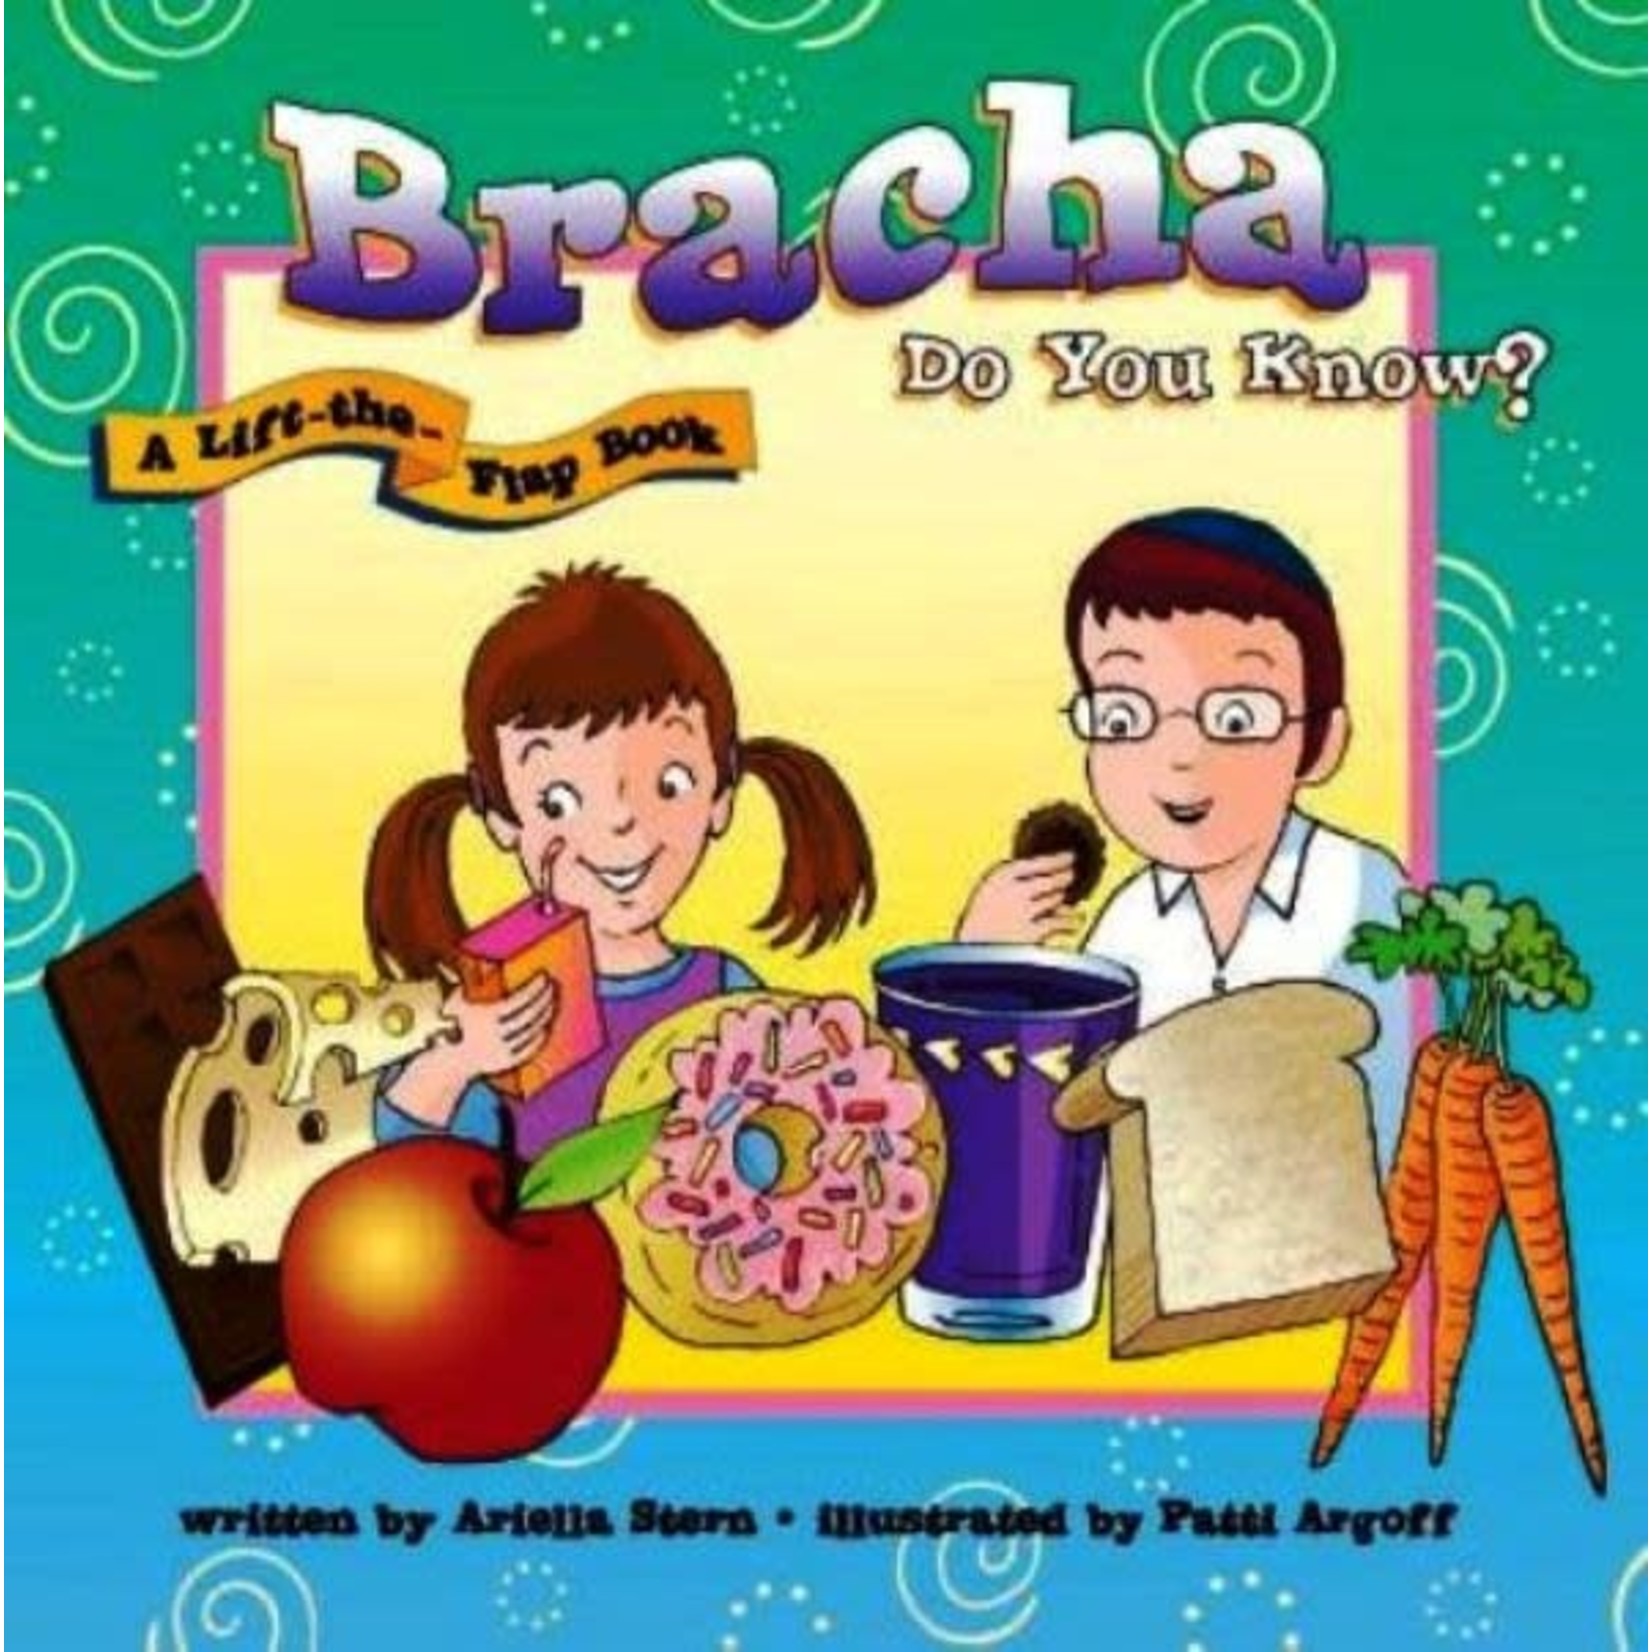 Brochos Do You Know? Lift the flap book